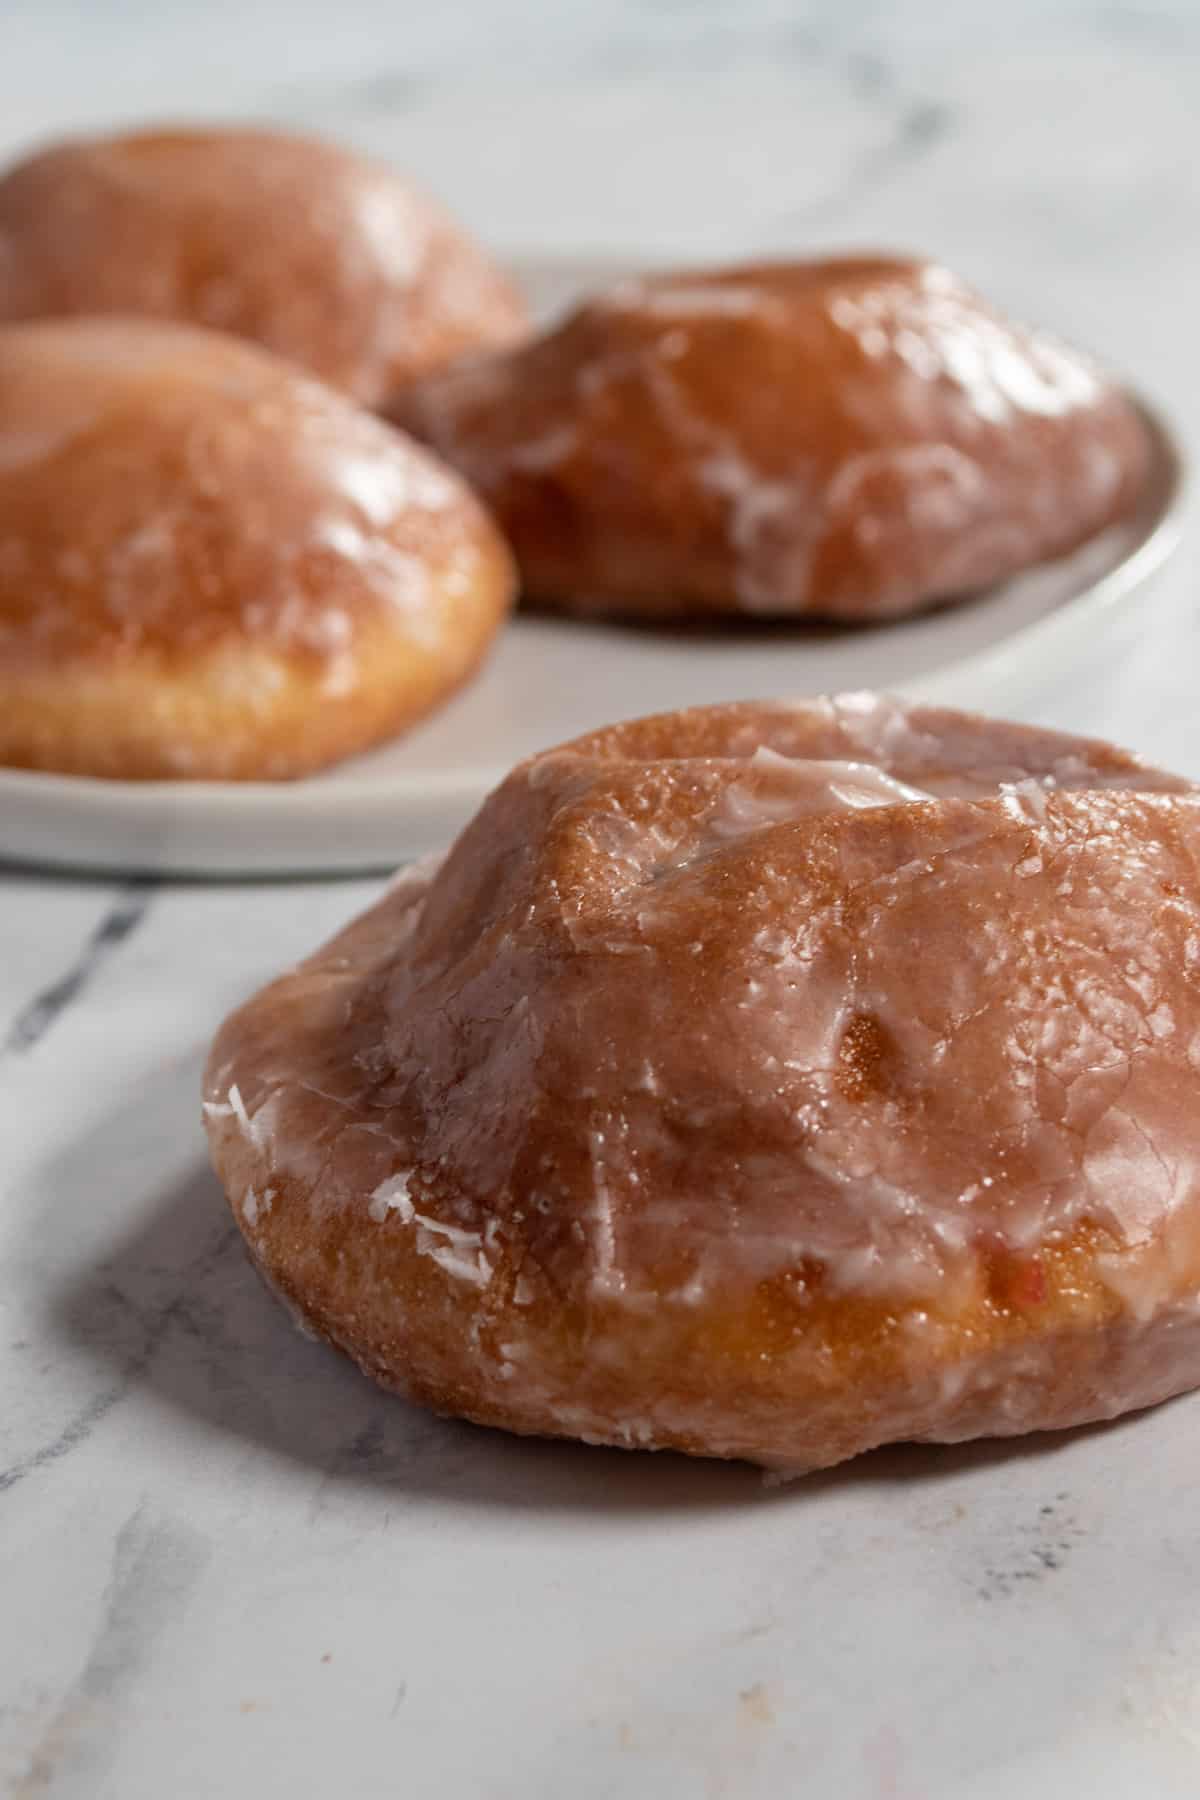 Four glazed donuts. One in the foreground and three on a plate in the background. 